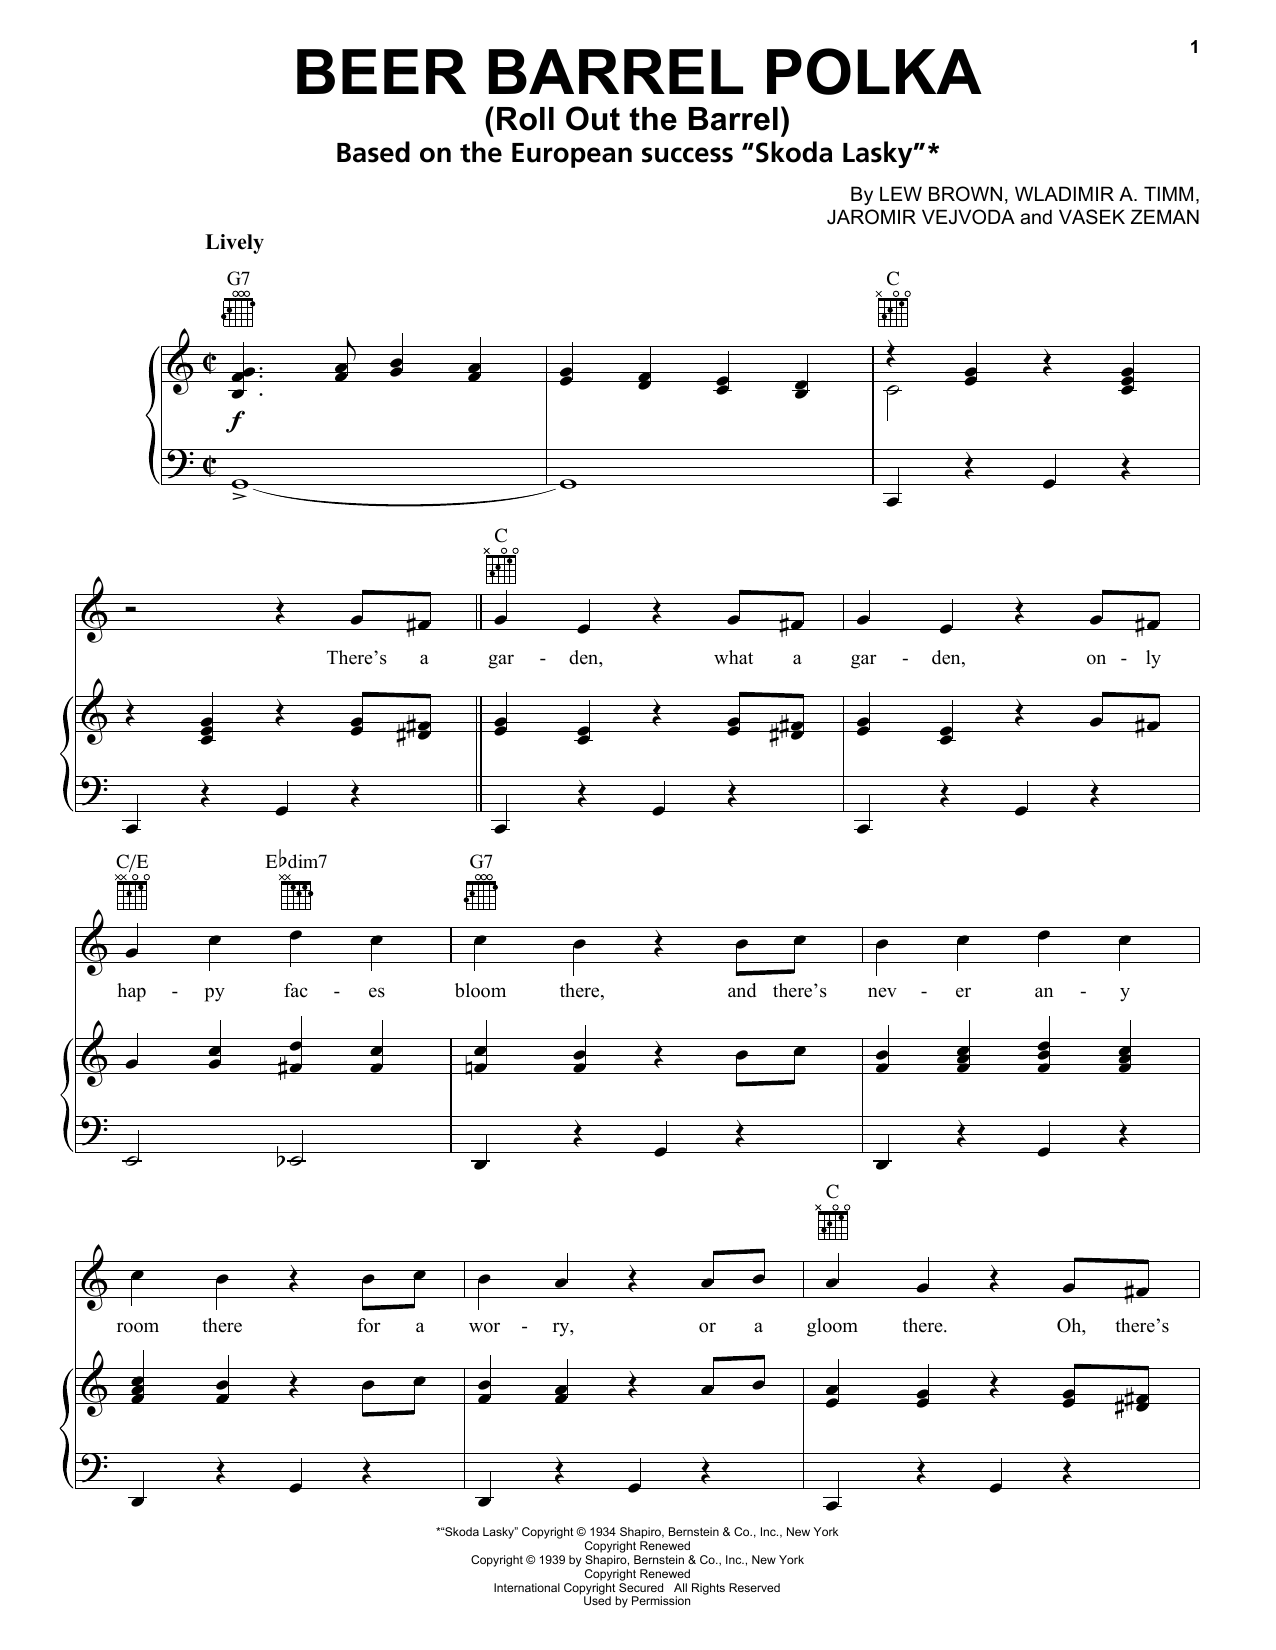 Download Bobby Vinton Beer Barrel Polka (Roll Out The Barrel) Sheet Music and Printable PDF Score for Bass Clarinet Solo